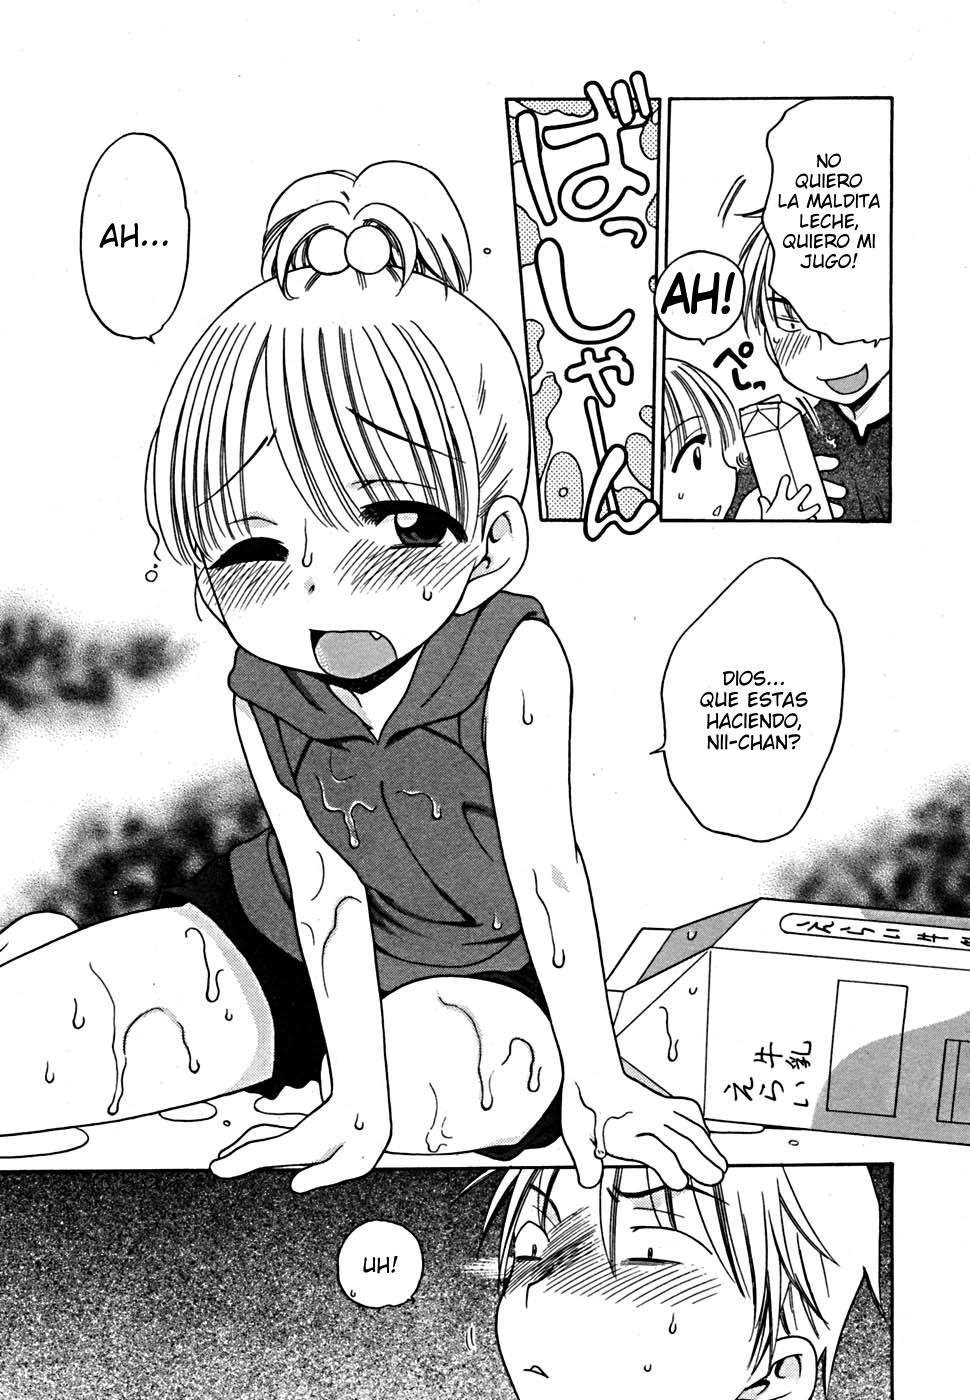 Me gustas Onii-chan! Chapter-3 - 6